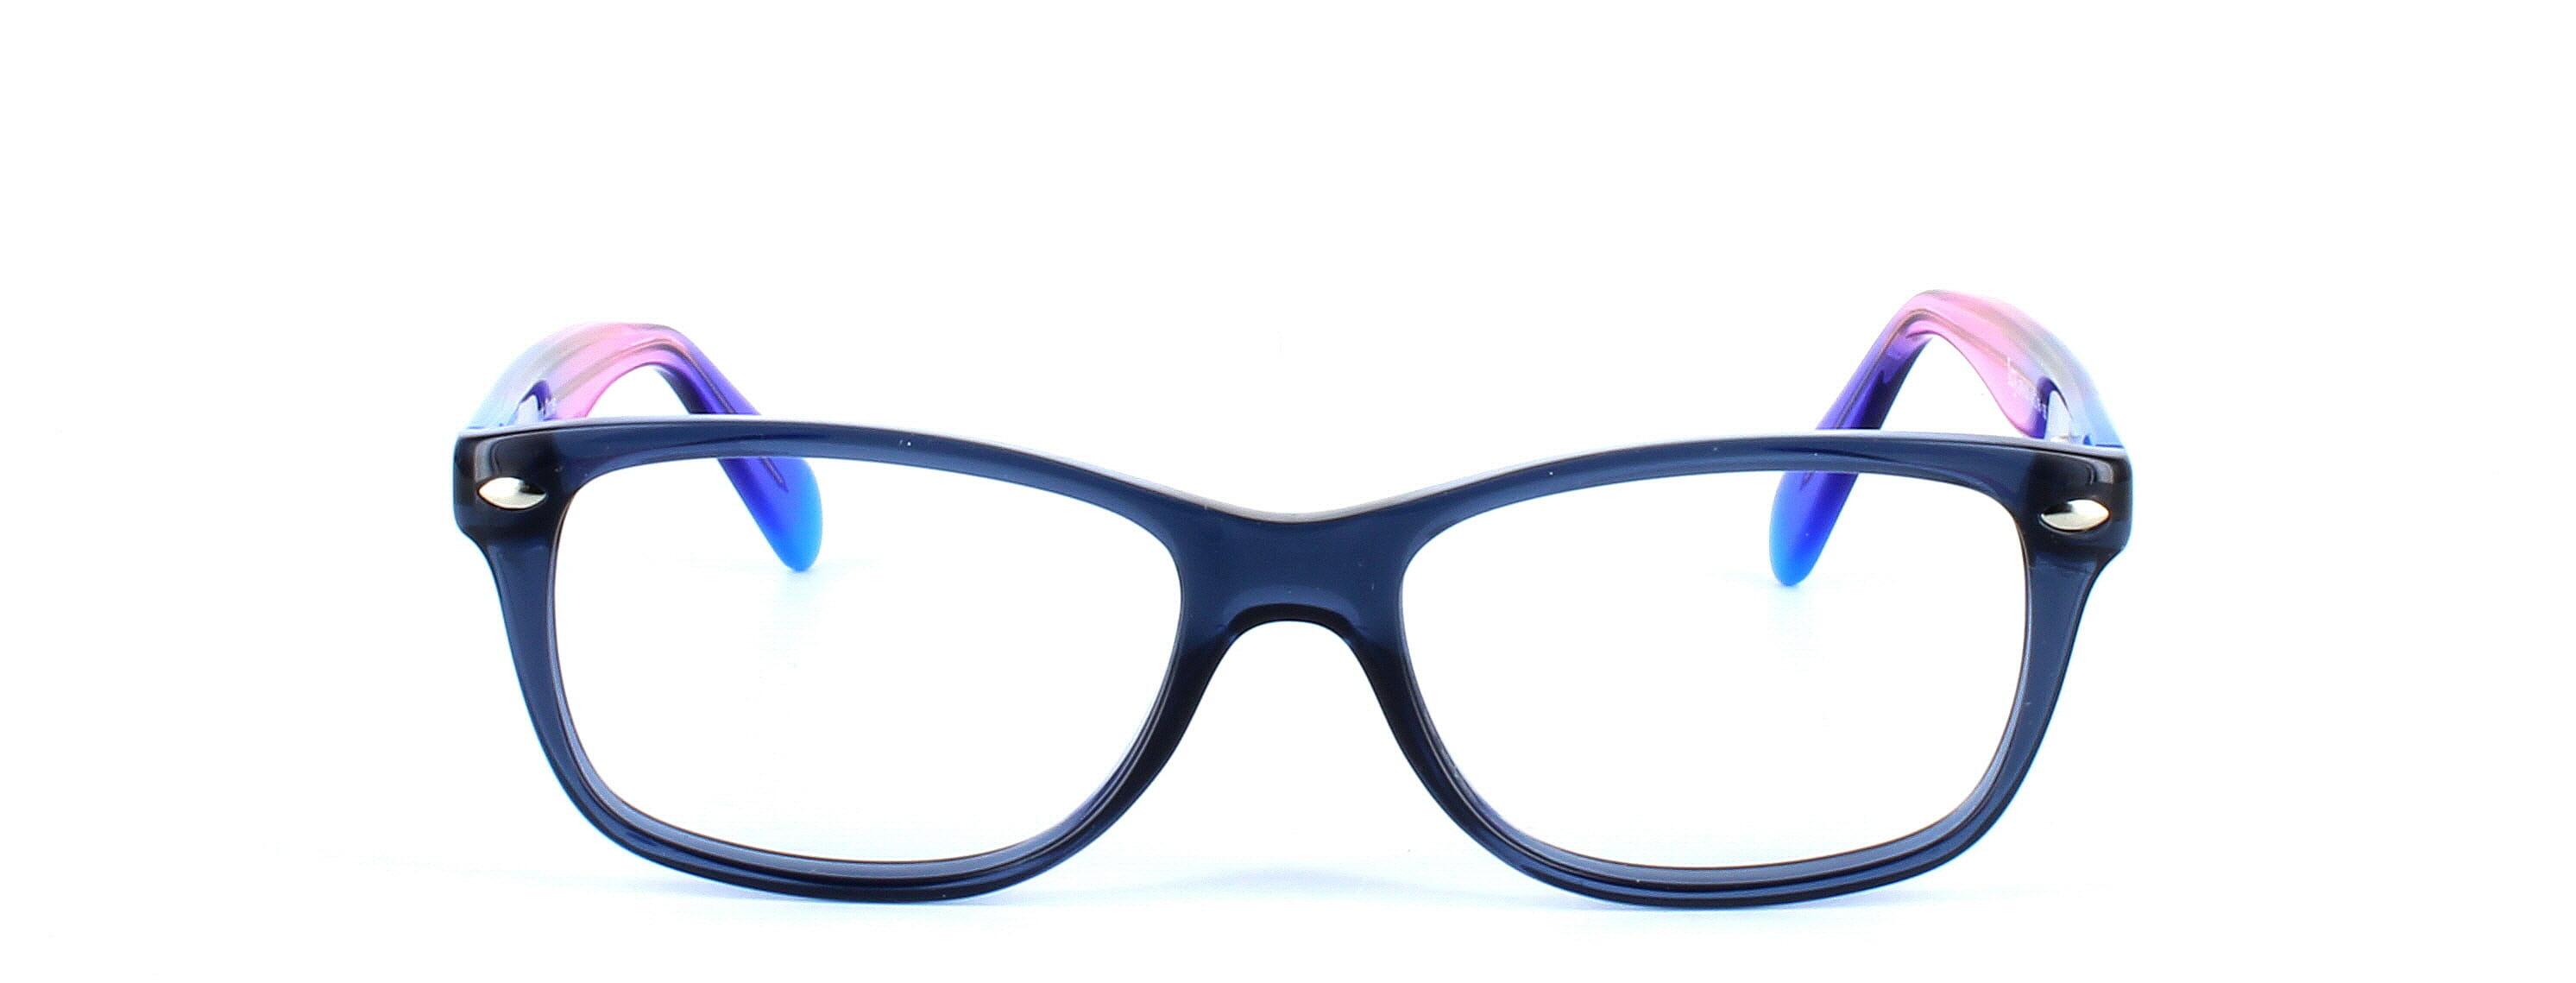 Liguria - Blue - Women's petite acetate glasses frame in blue with multi-coloured arms - image view 2